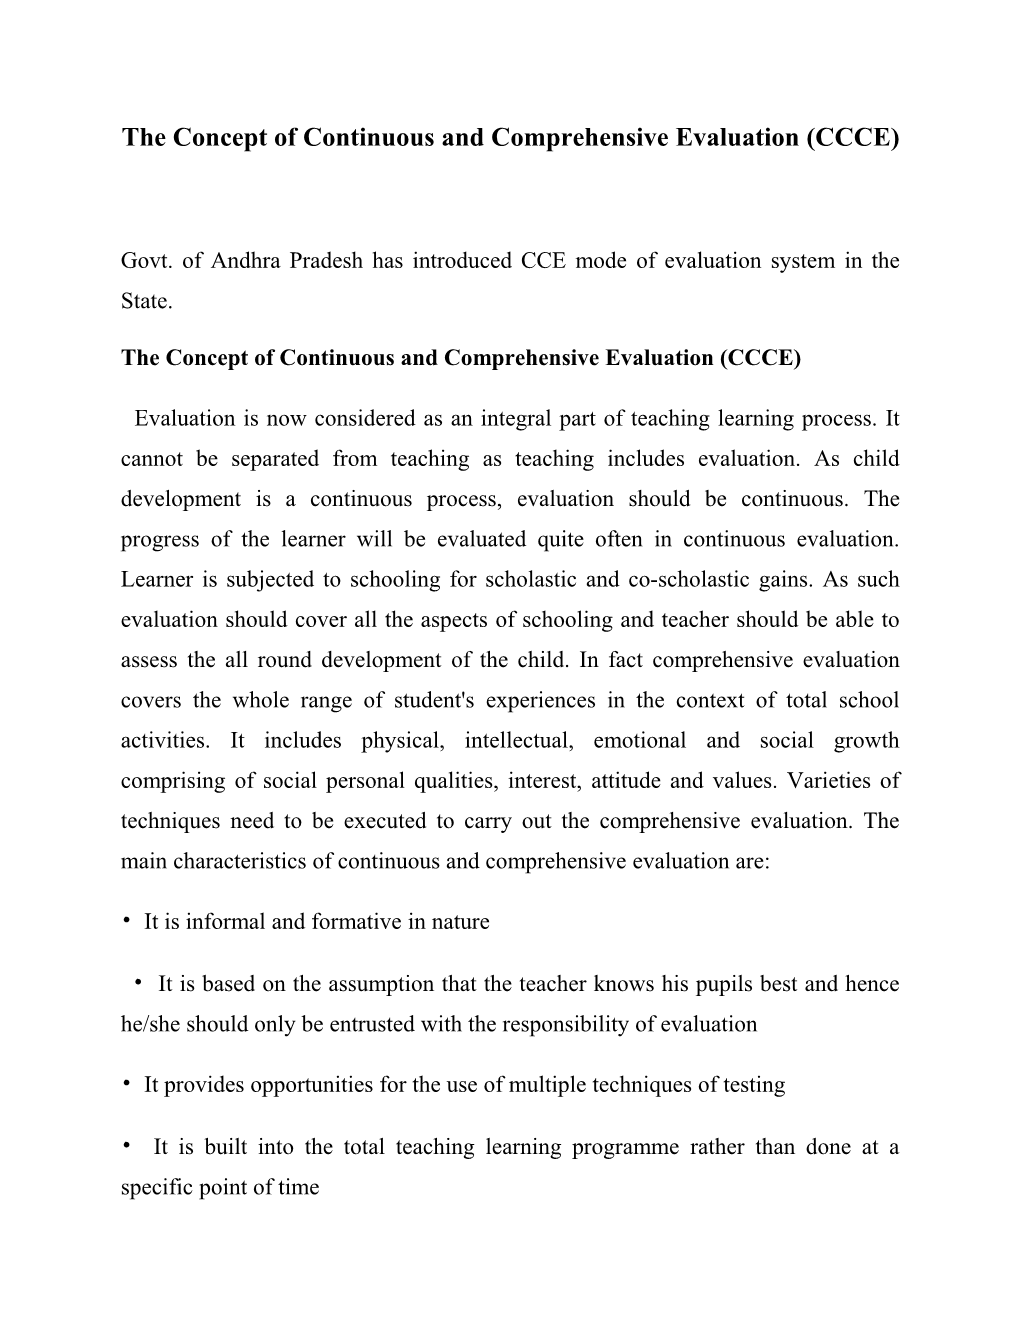 The Concept of Continuous and Comprehensive Evaluation (CCCE)